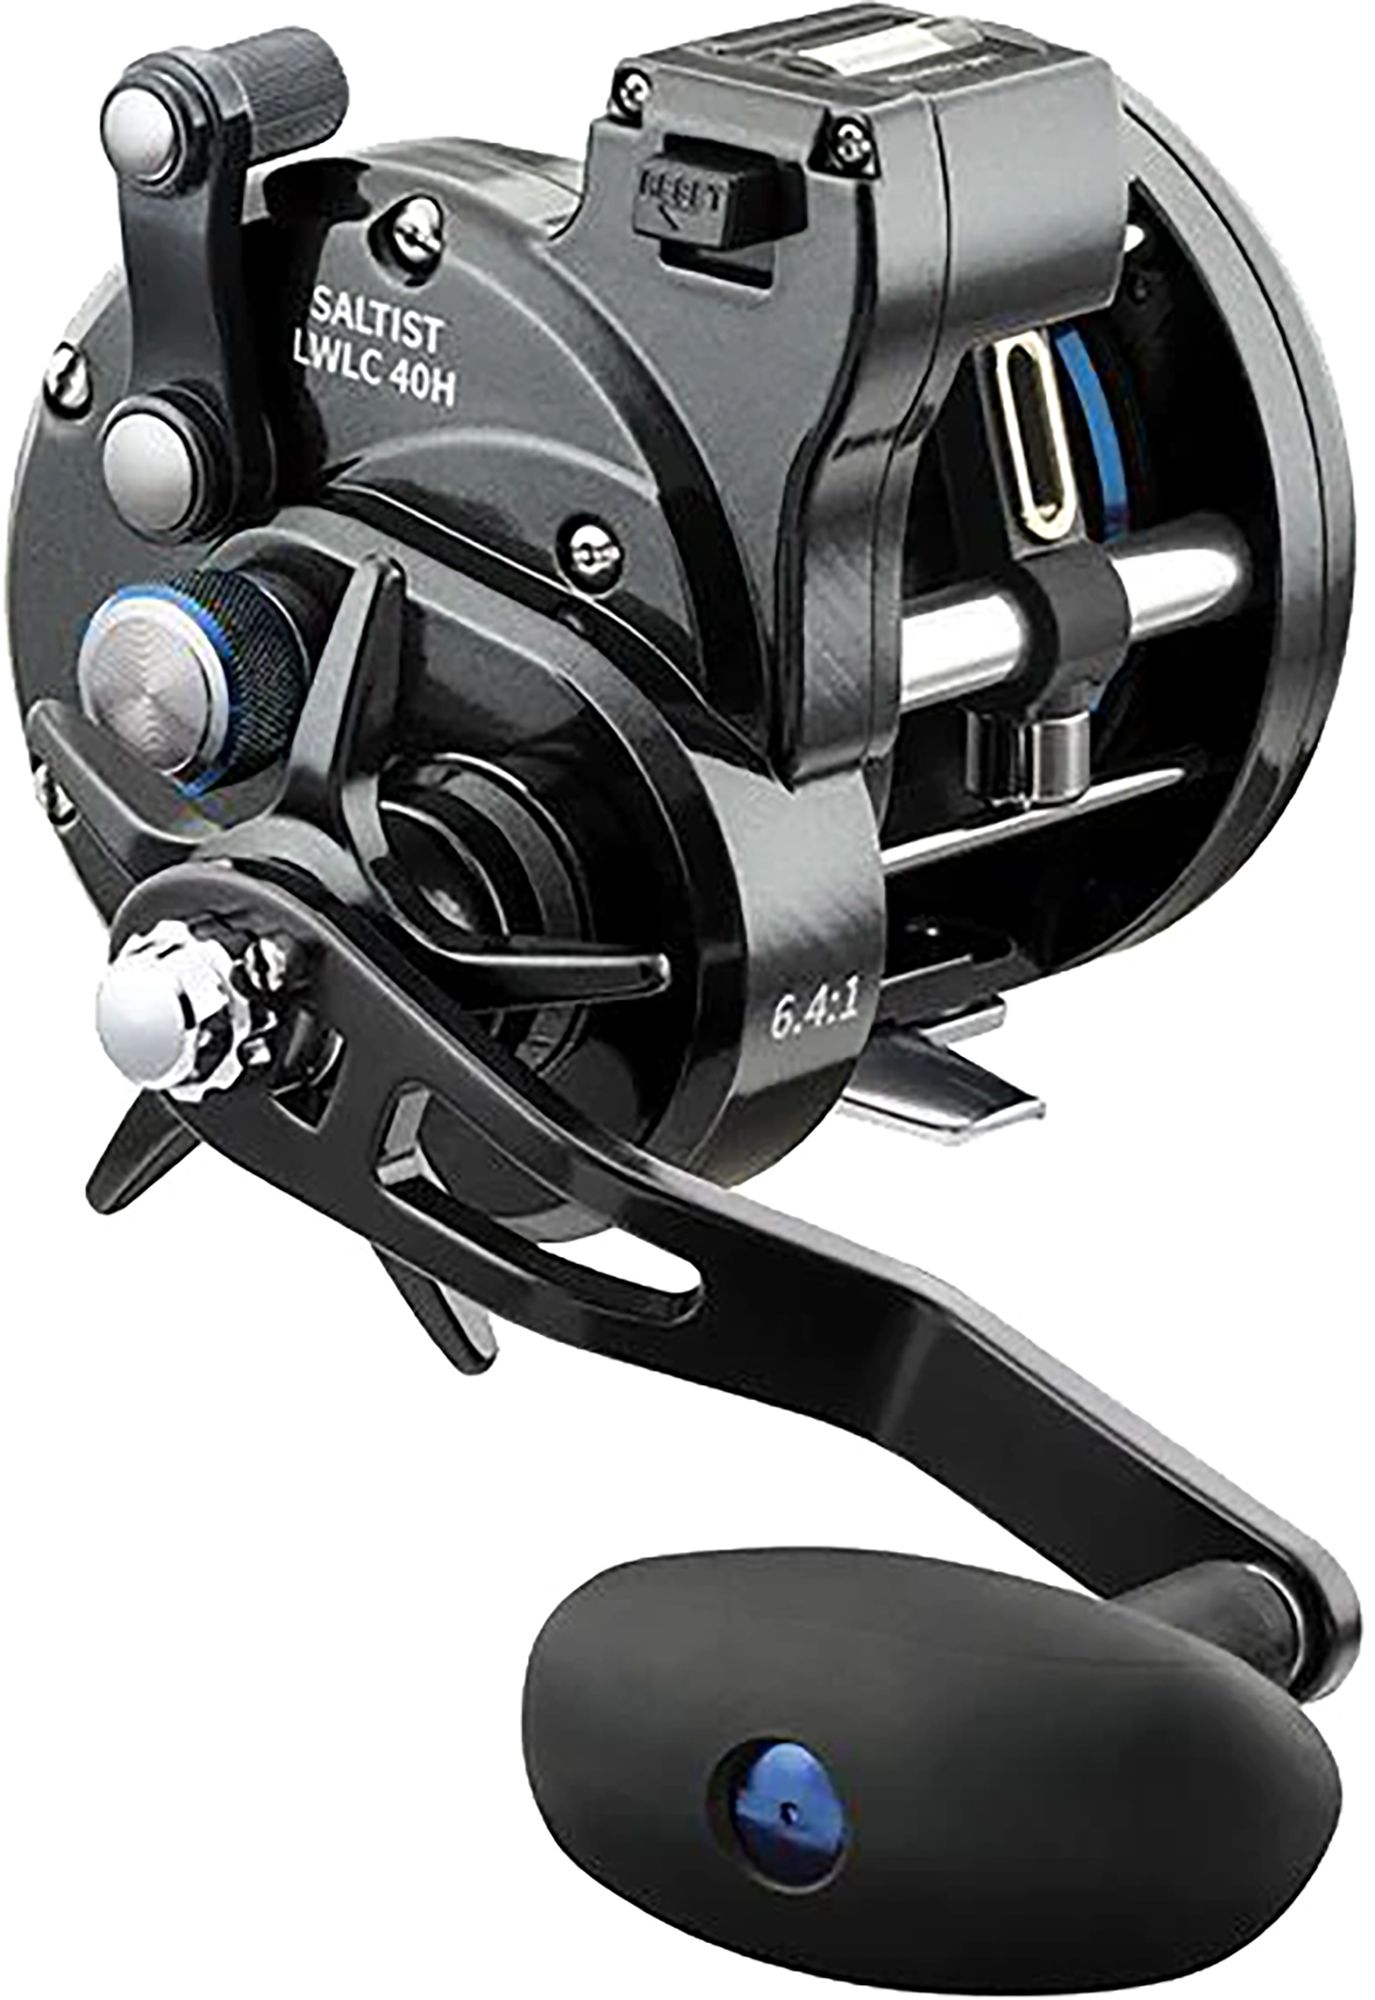 Photos - Other for Fishing Daiwa Saltist Levelwind Line Counter Conventional Reel 24DAIUSLTSTLWLC30RE 